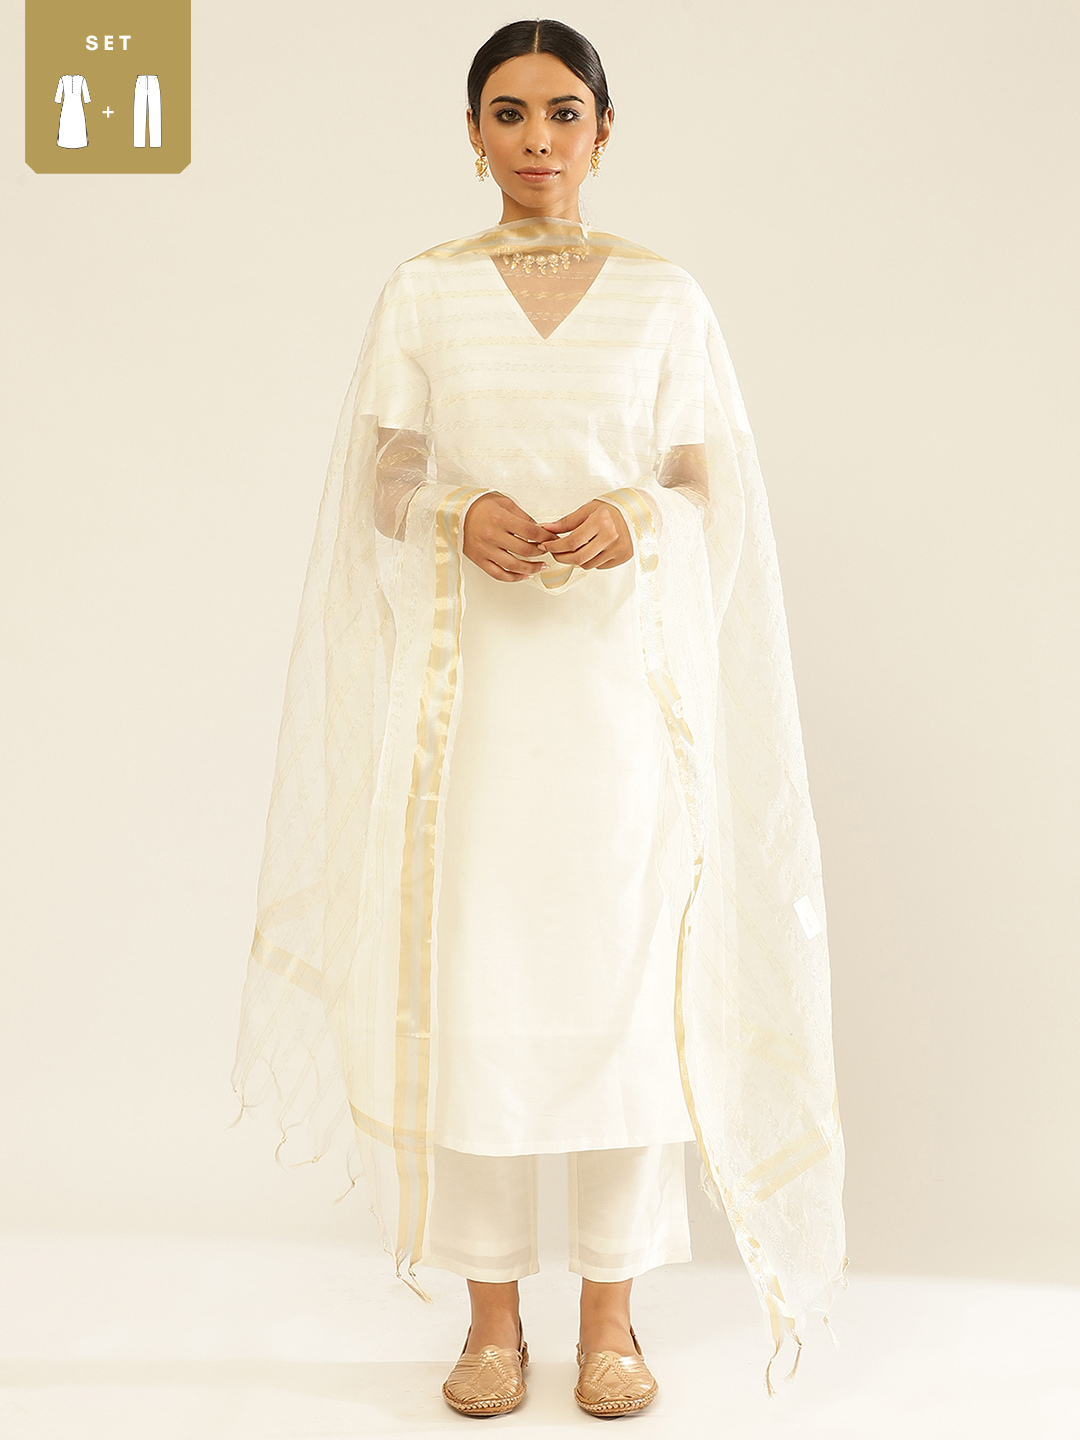 Solid color straight kurta with bell sleeves accompanied with straight pants and Dupatta